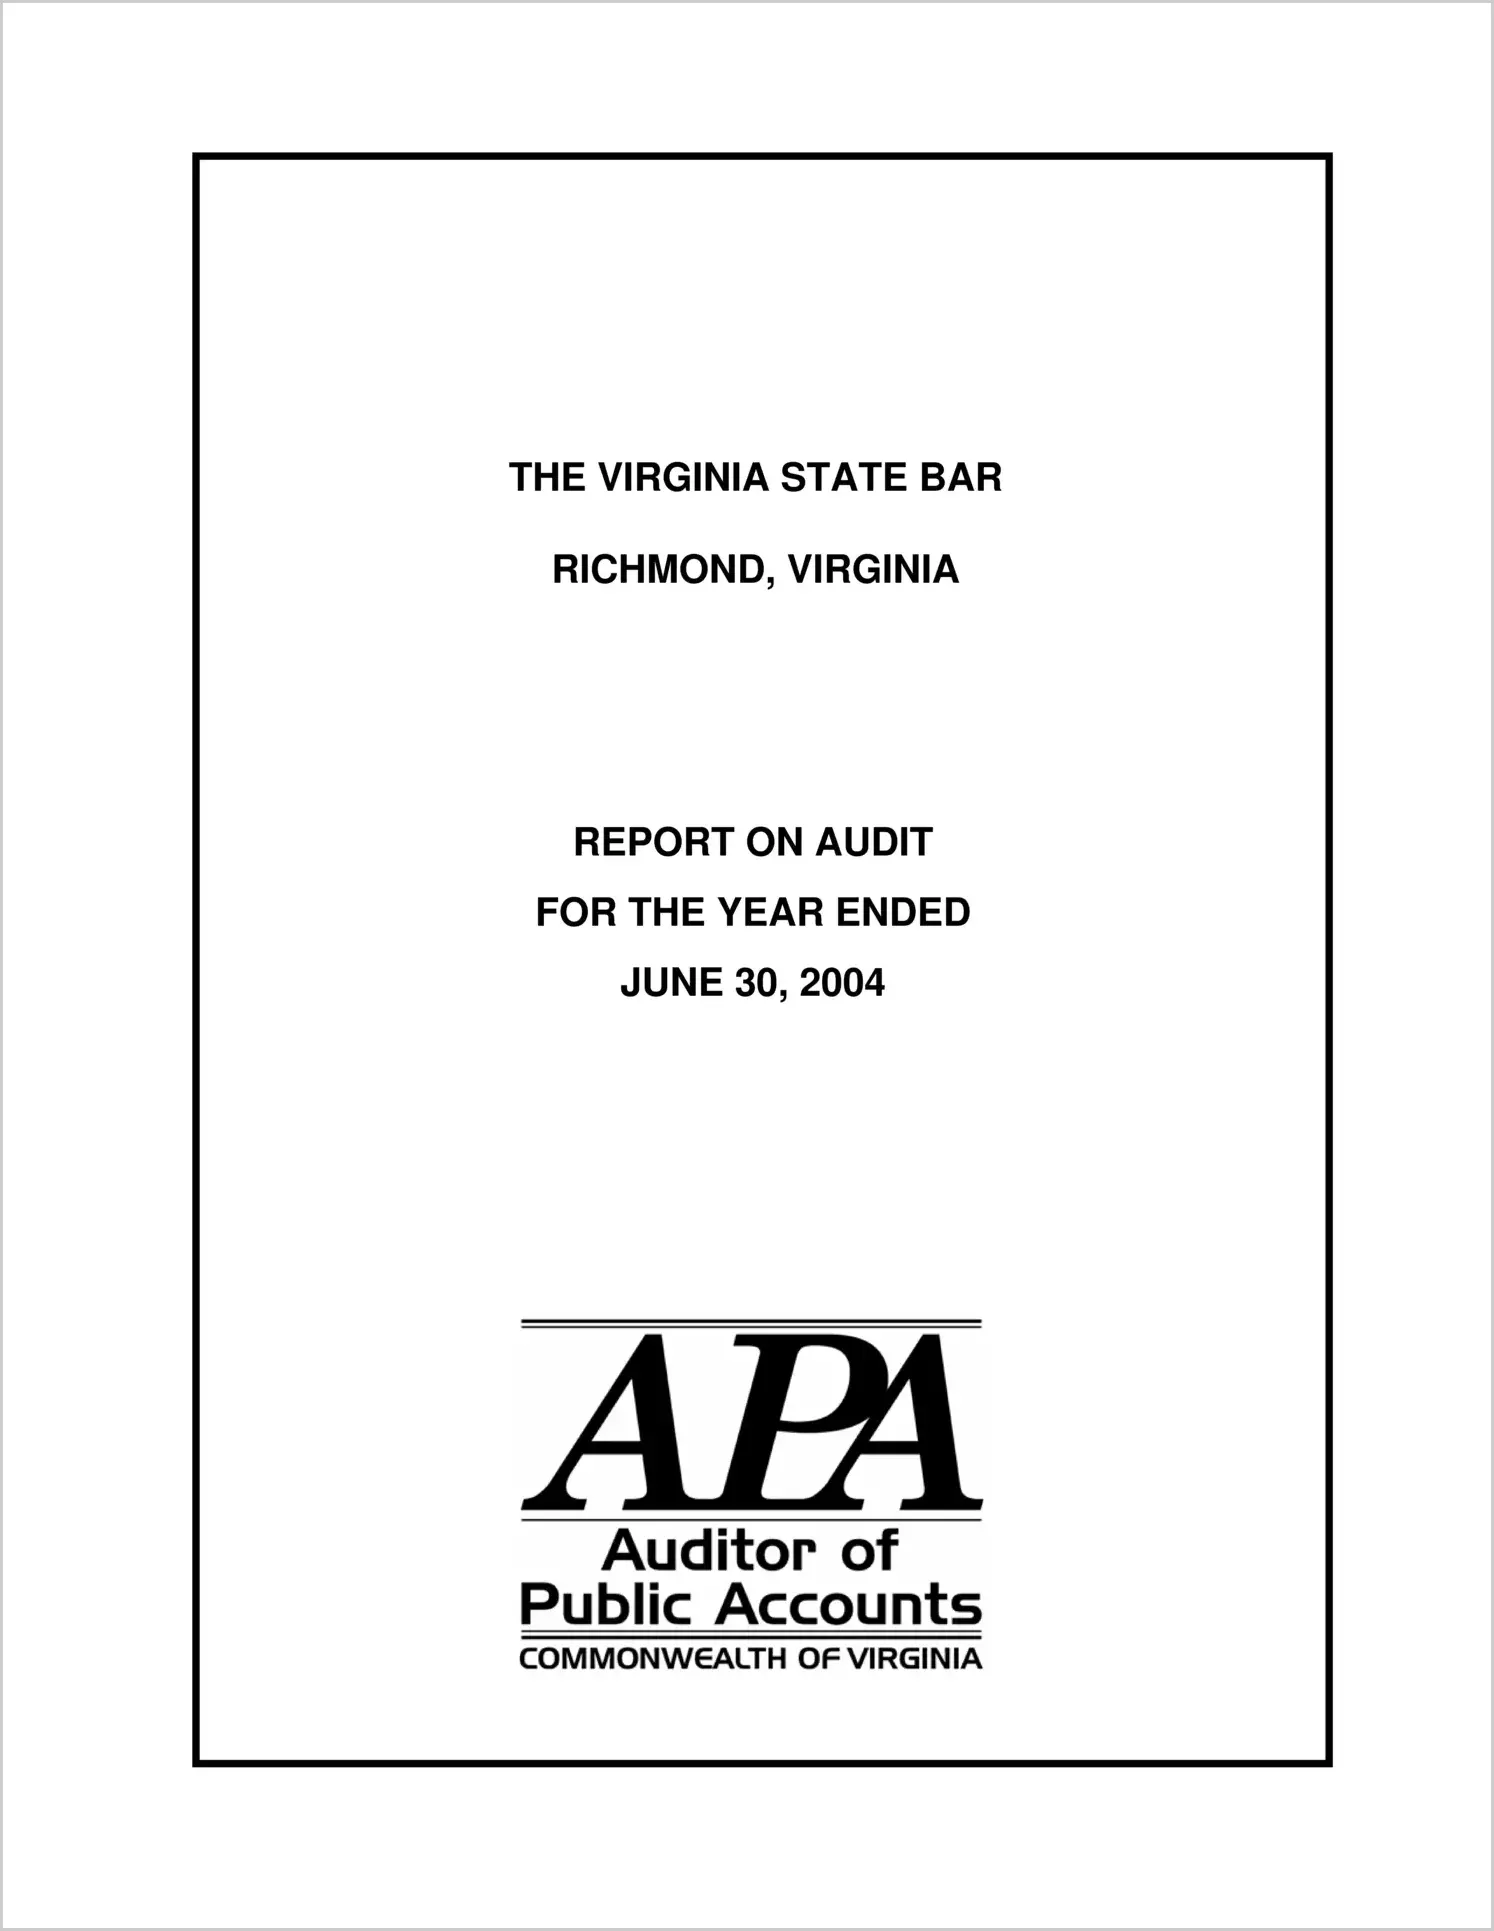 Virginia State Bar for the year ended June 30, 2004